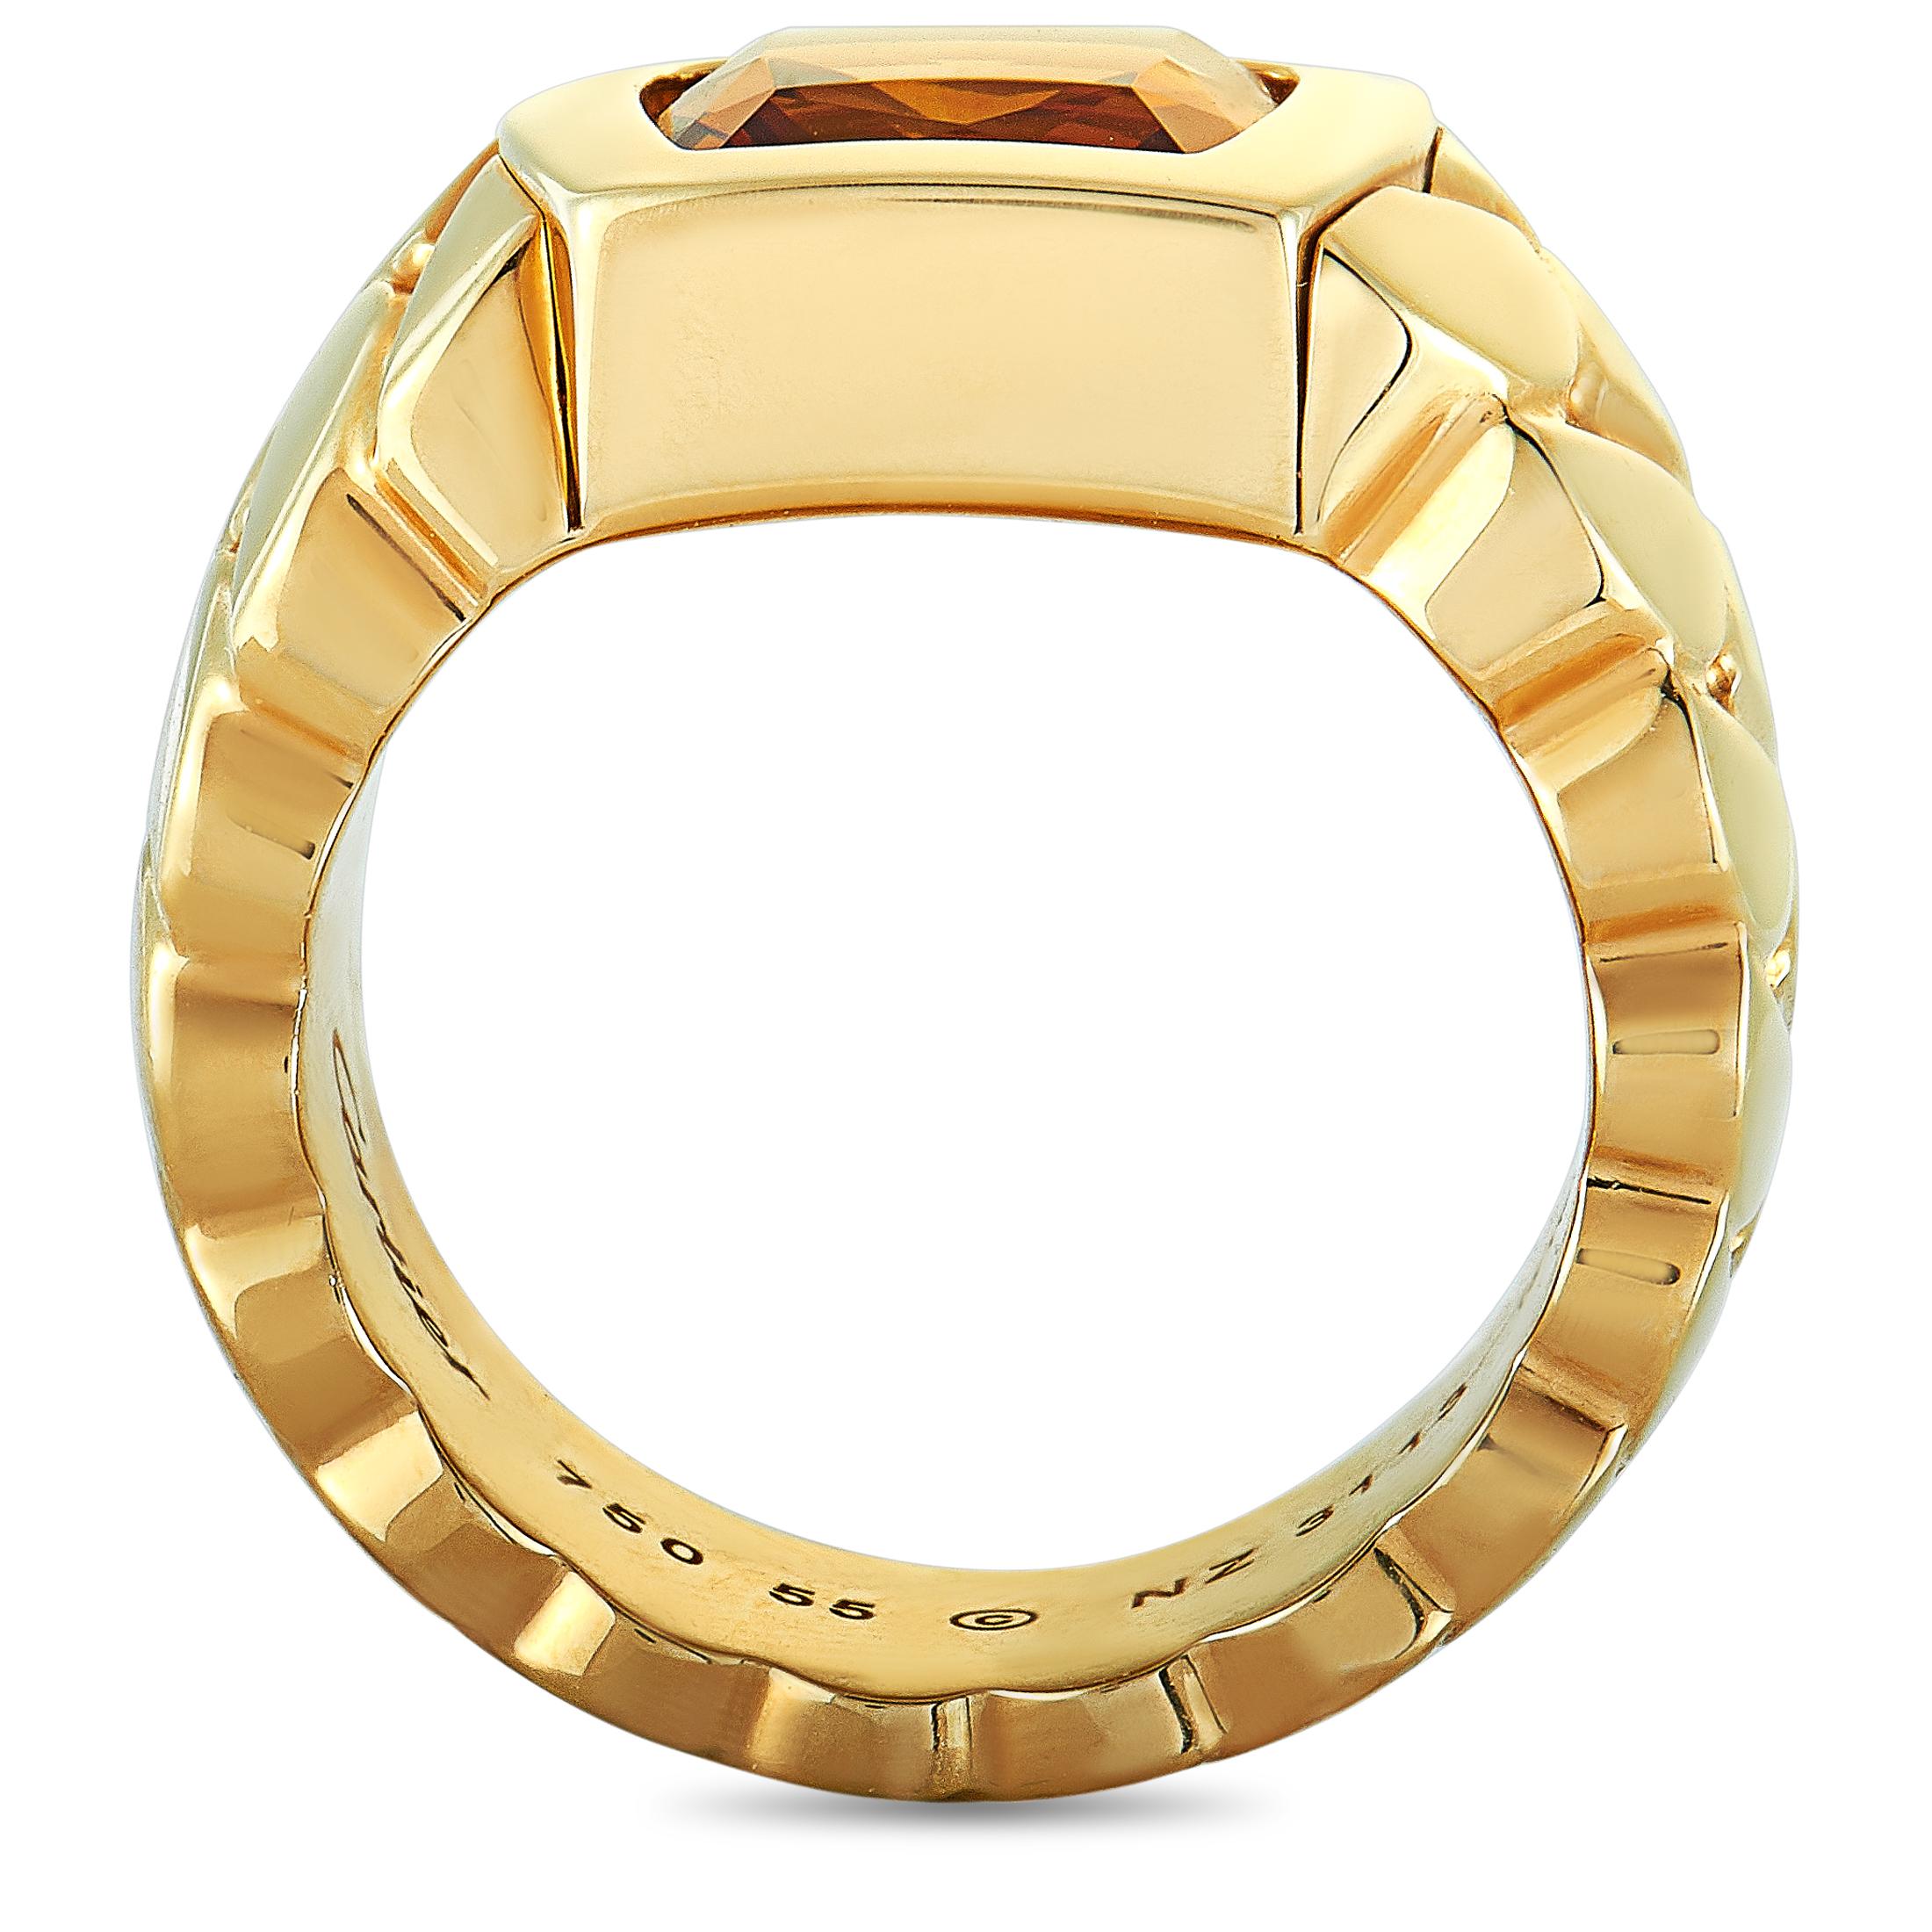 The Cartier “La Dona” ring is crafted from 18K yellow gold and set with a citrine. The ring weighs 33.6 grams, boasting band thickness of 9 mm and top height of 6 mm, while top dimensions measure 15 by 15 mm.

This jewelry piece is offered in estate